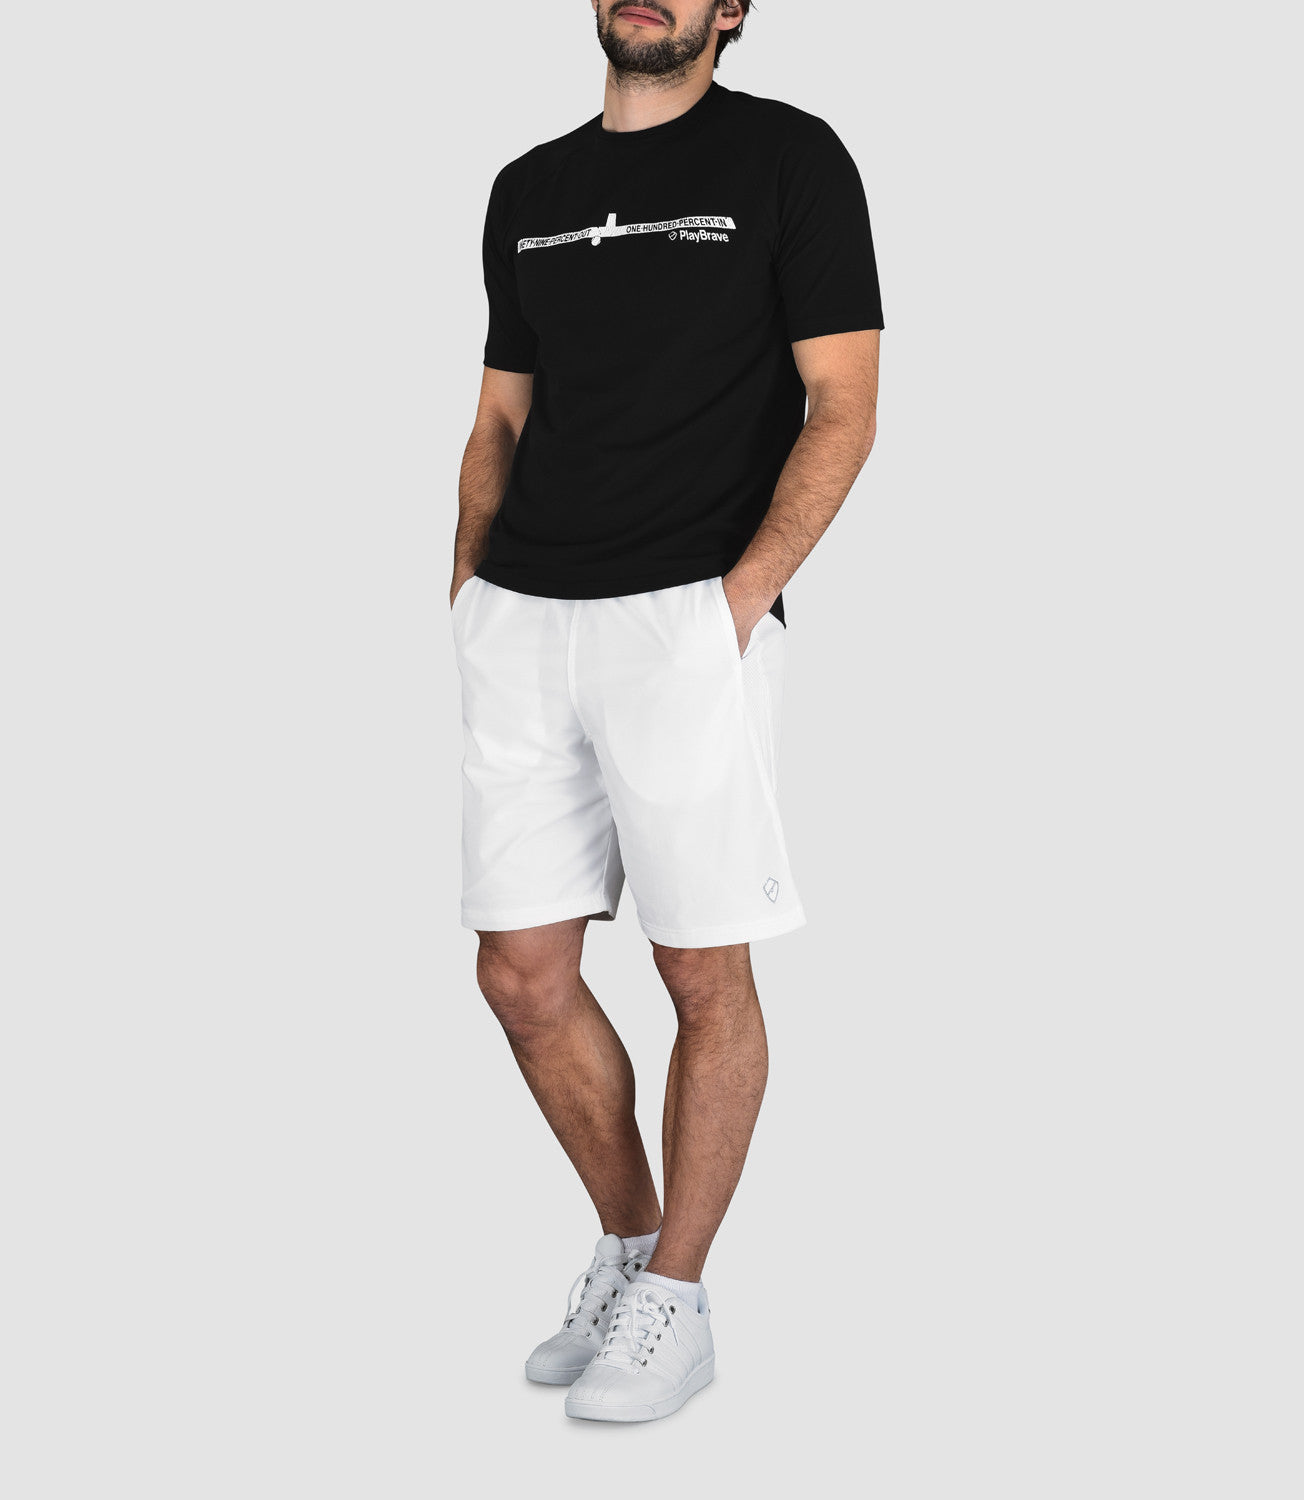 Men's Tops Tennis/Fitness/Golf Clothing -The Call Cotton Round Neck Tee-PlayBrave-Black-S-PlayBrave Sports UK